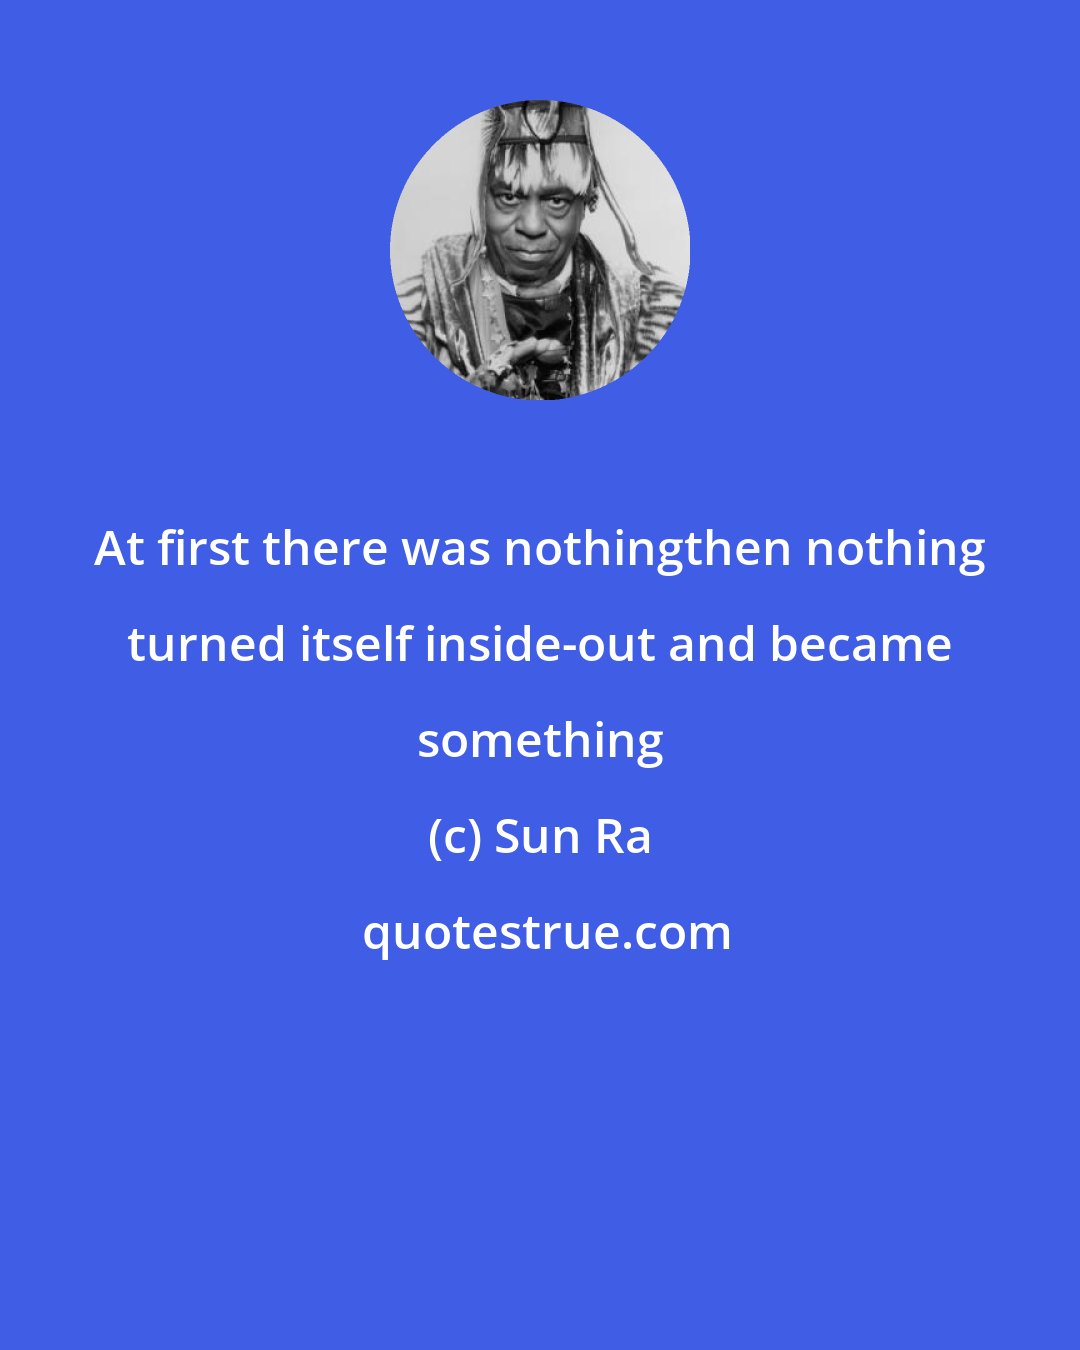 Sun Ra: At first there was nothingthen nothing turned itself inside-out and became something